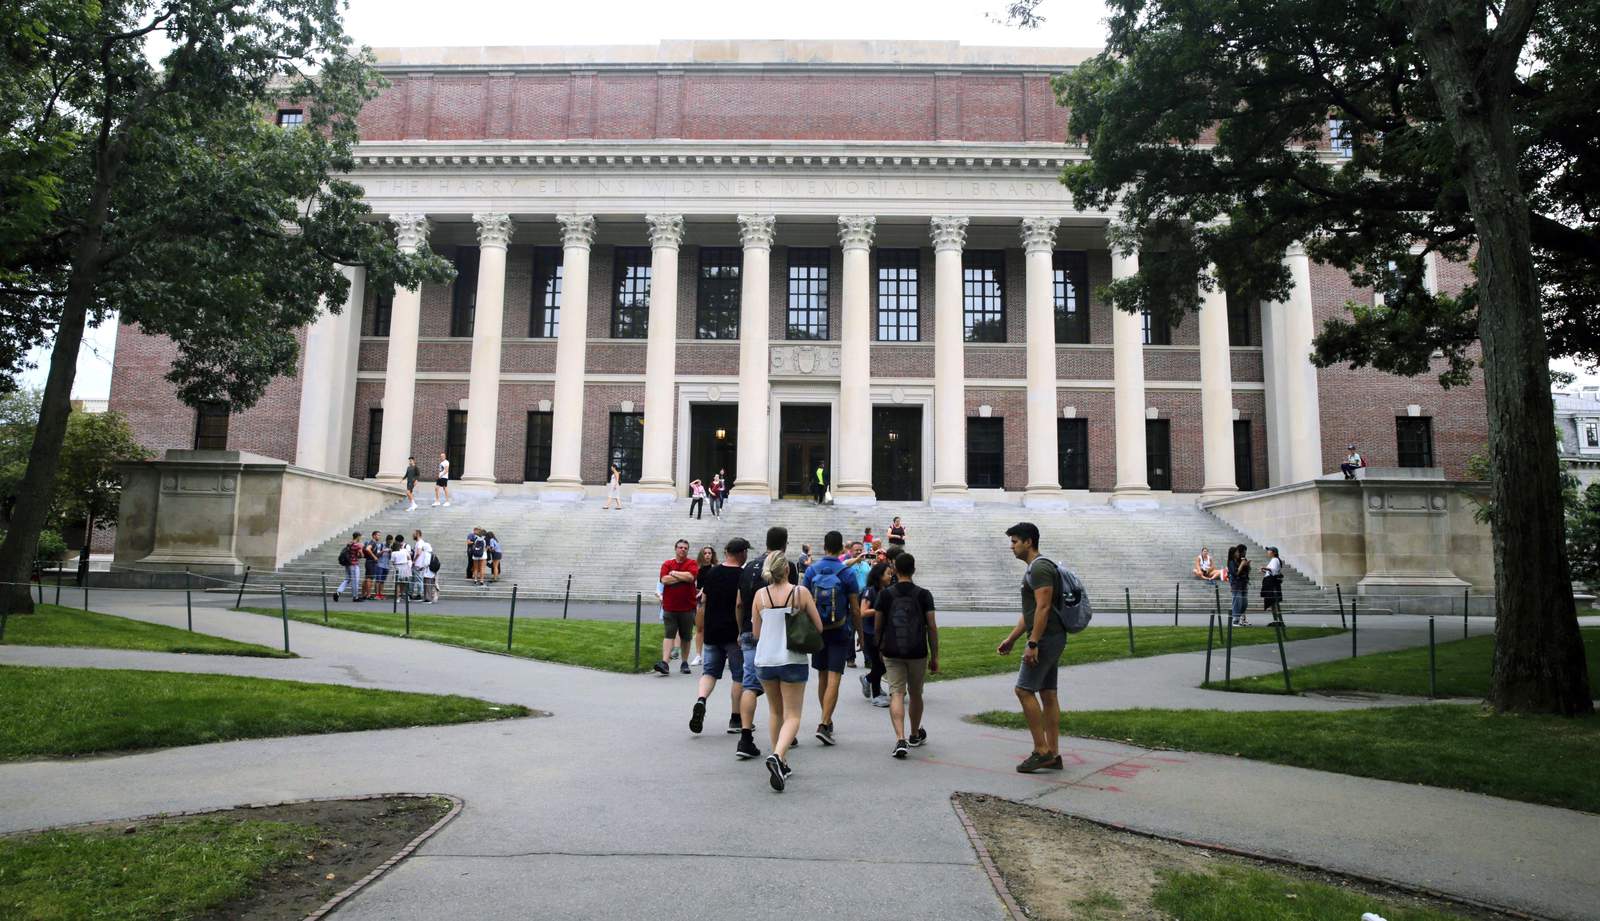 Appeals court clears Harvard of racial bias in admissions